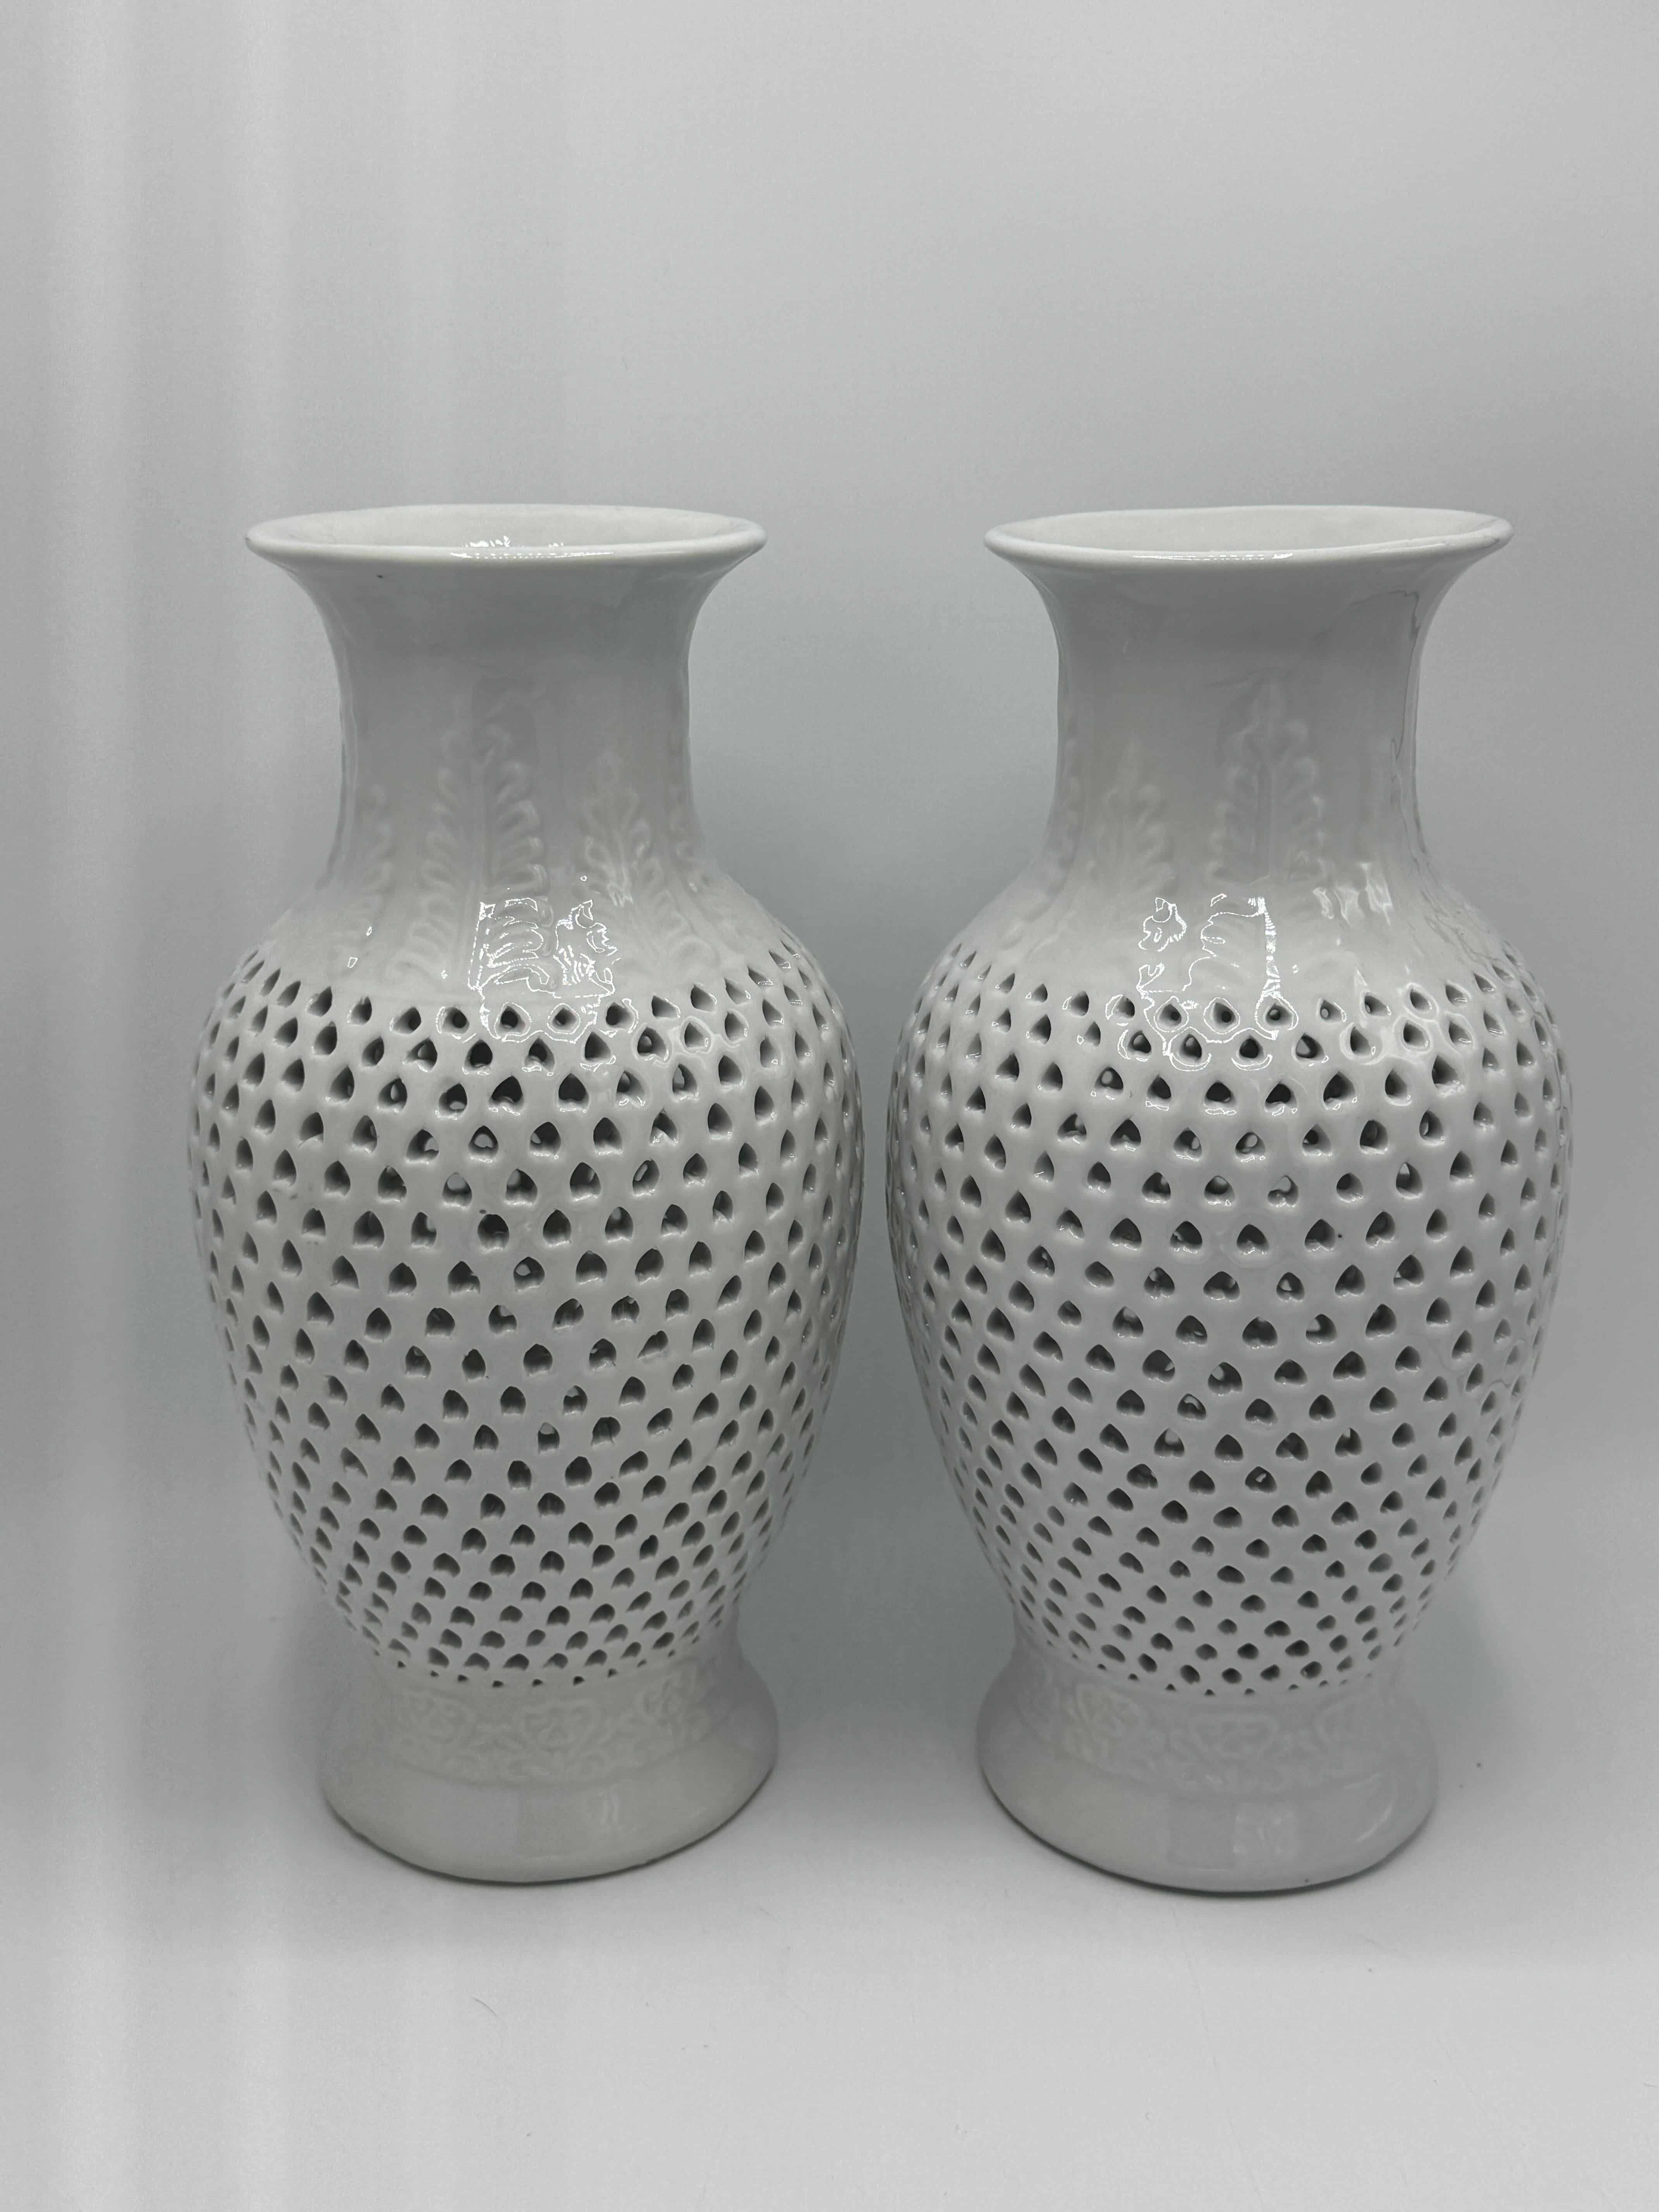 Offered is a fabulous, pair of 1960s Blanc de Chine pierced porcelain urns. The pair feature a pierced design over the center body, with a raised leaf motif along the neck and base. On the underside, there are holes large enough to have these urns